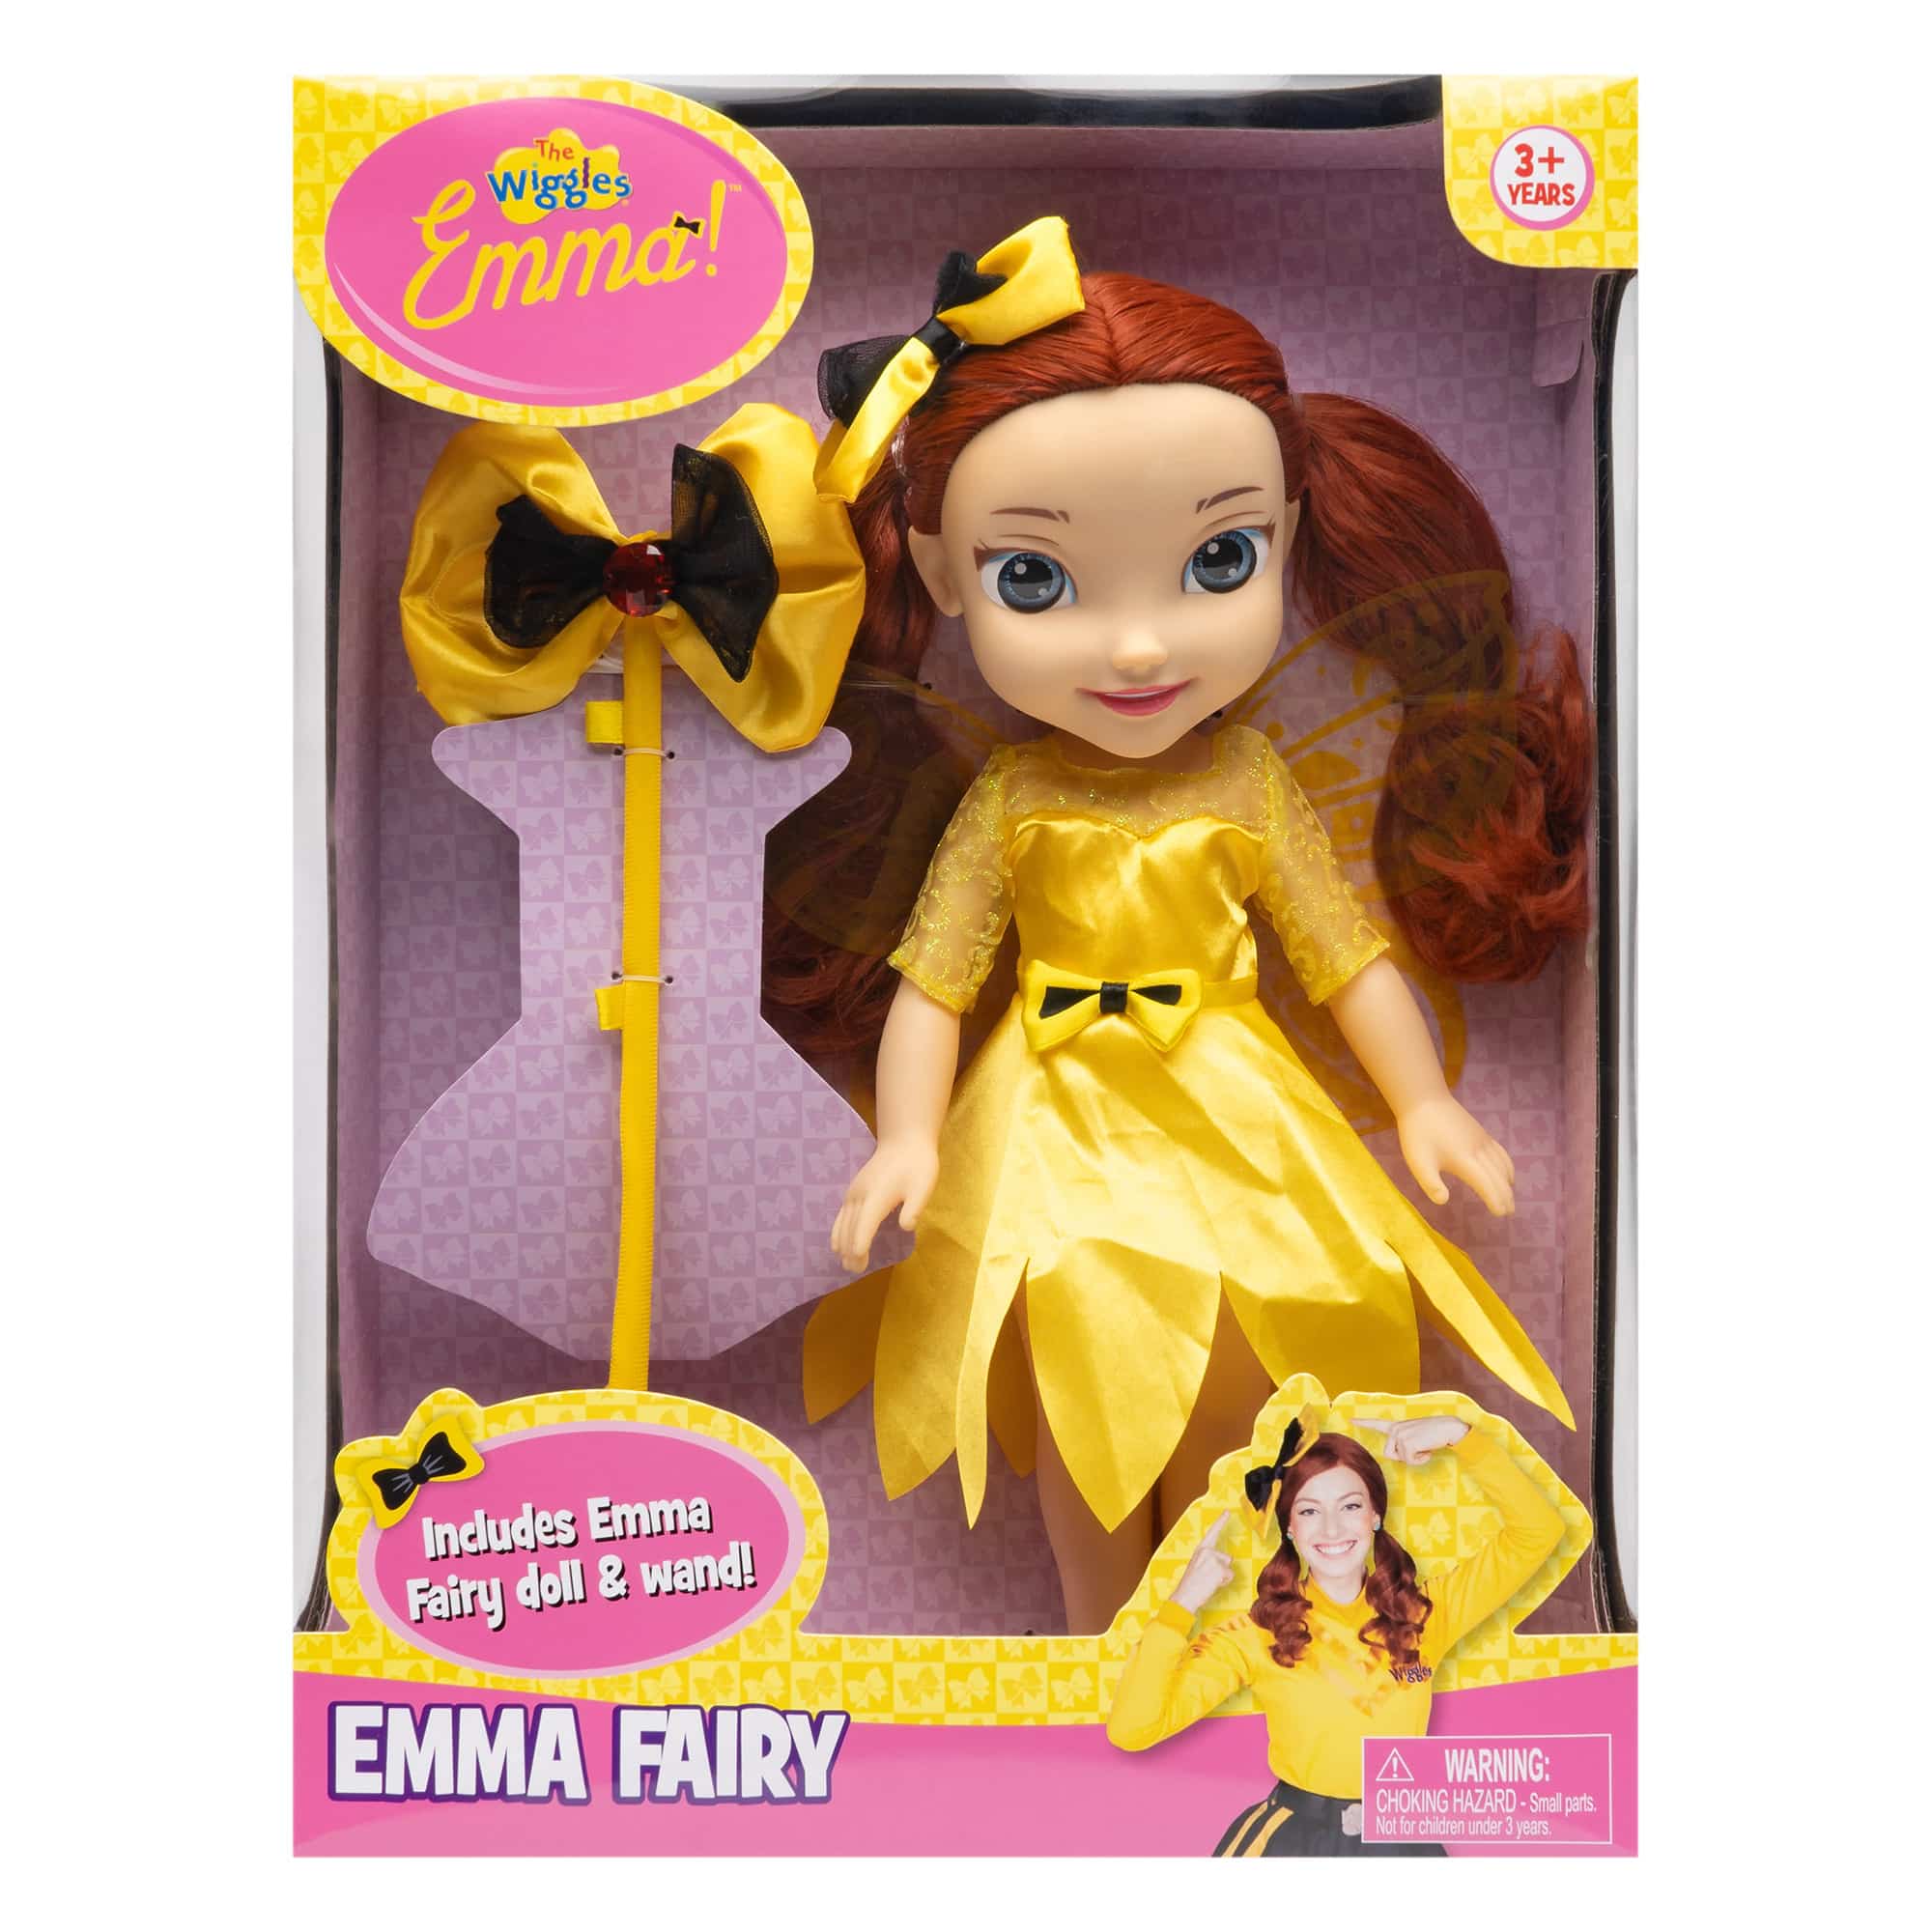 The Wiggles - Emma Fairy Doll